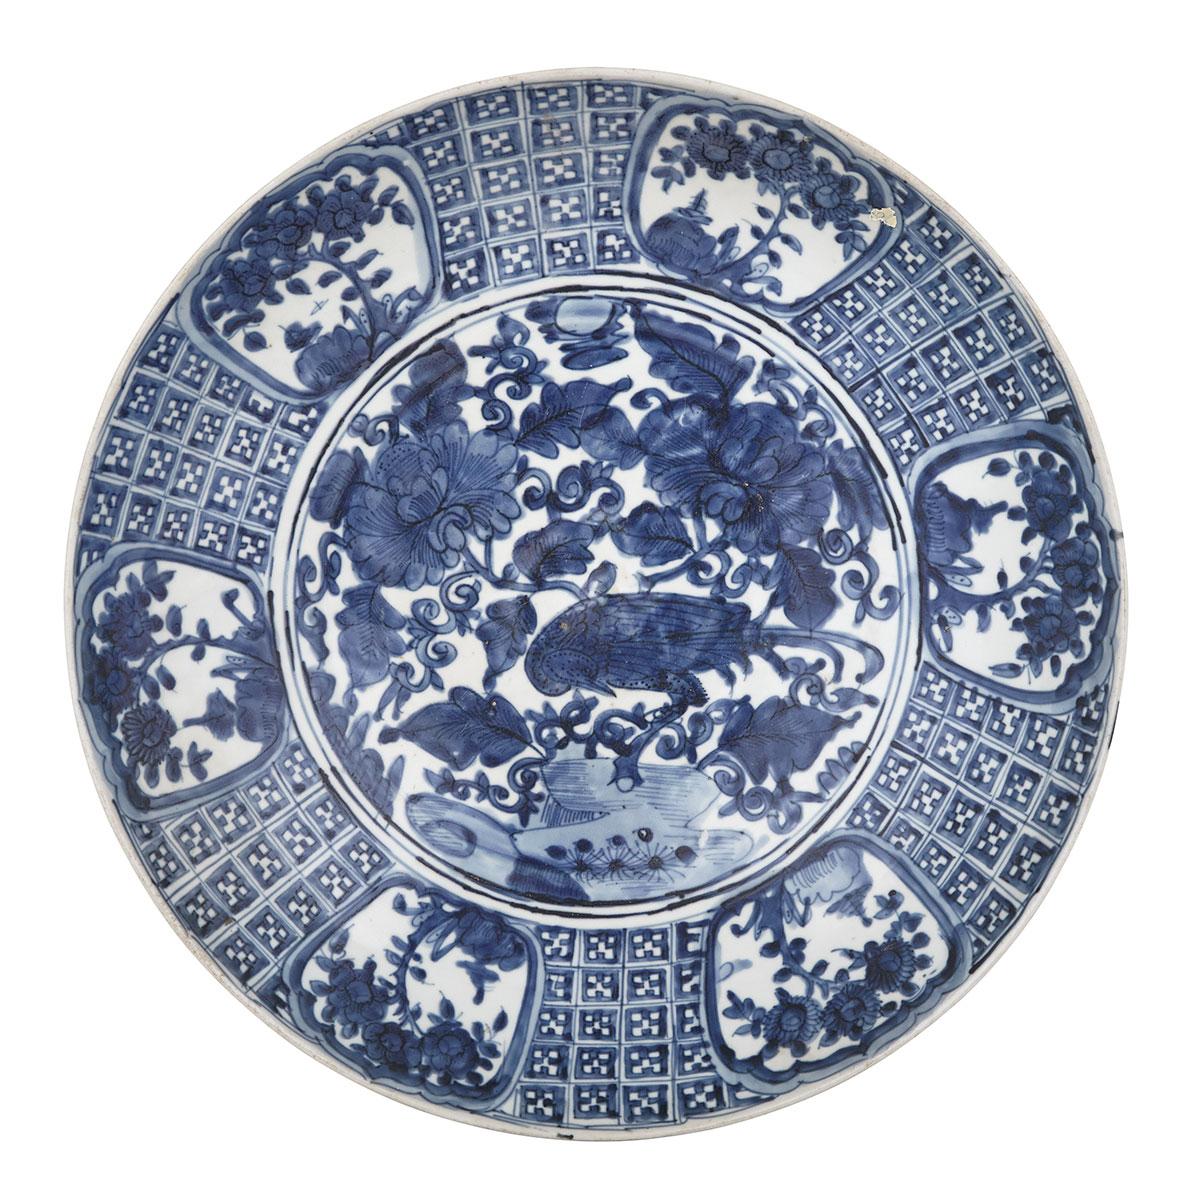 Large Blue and White Charger, 16th/17th Century